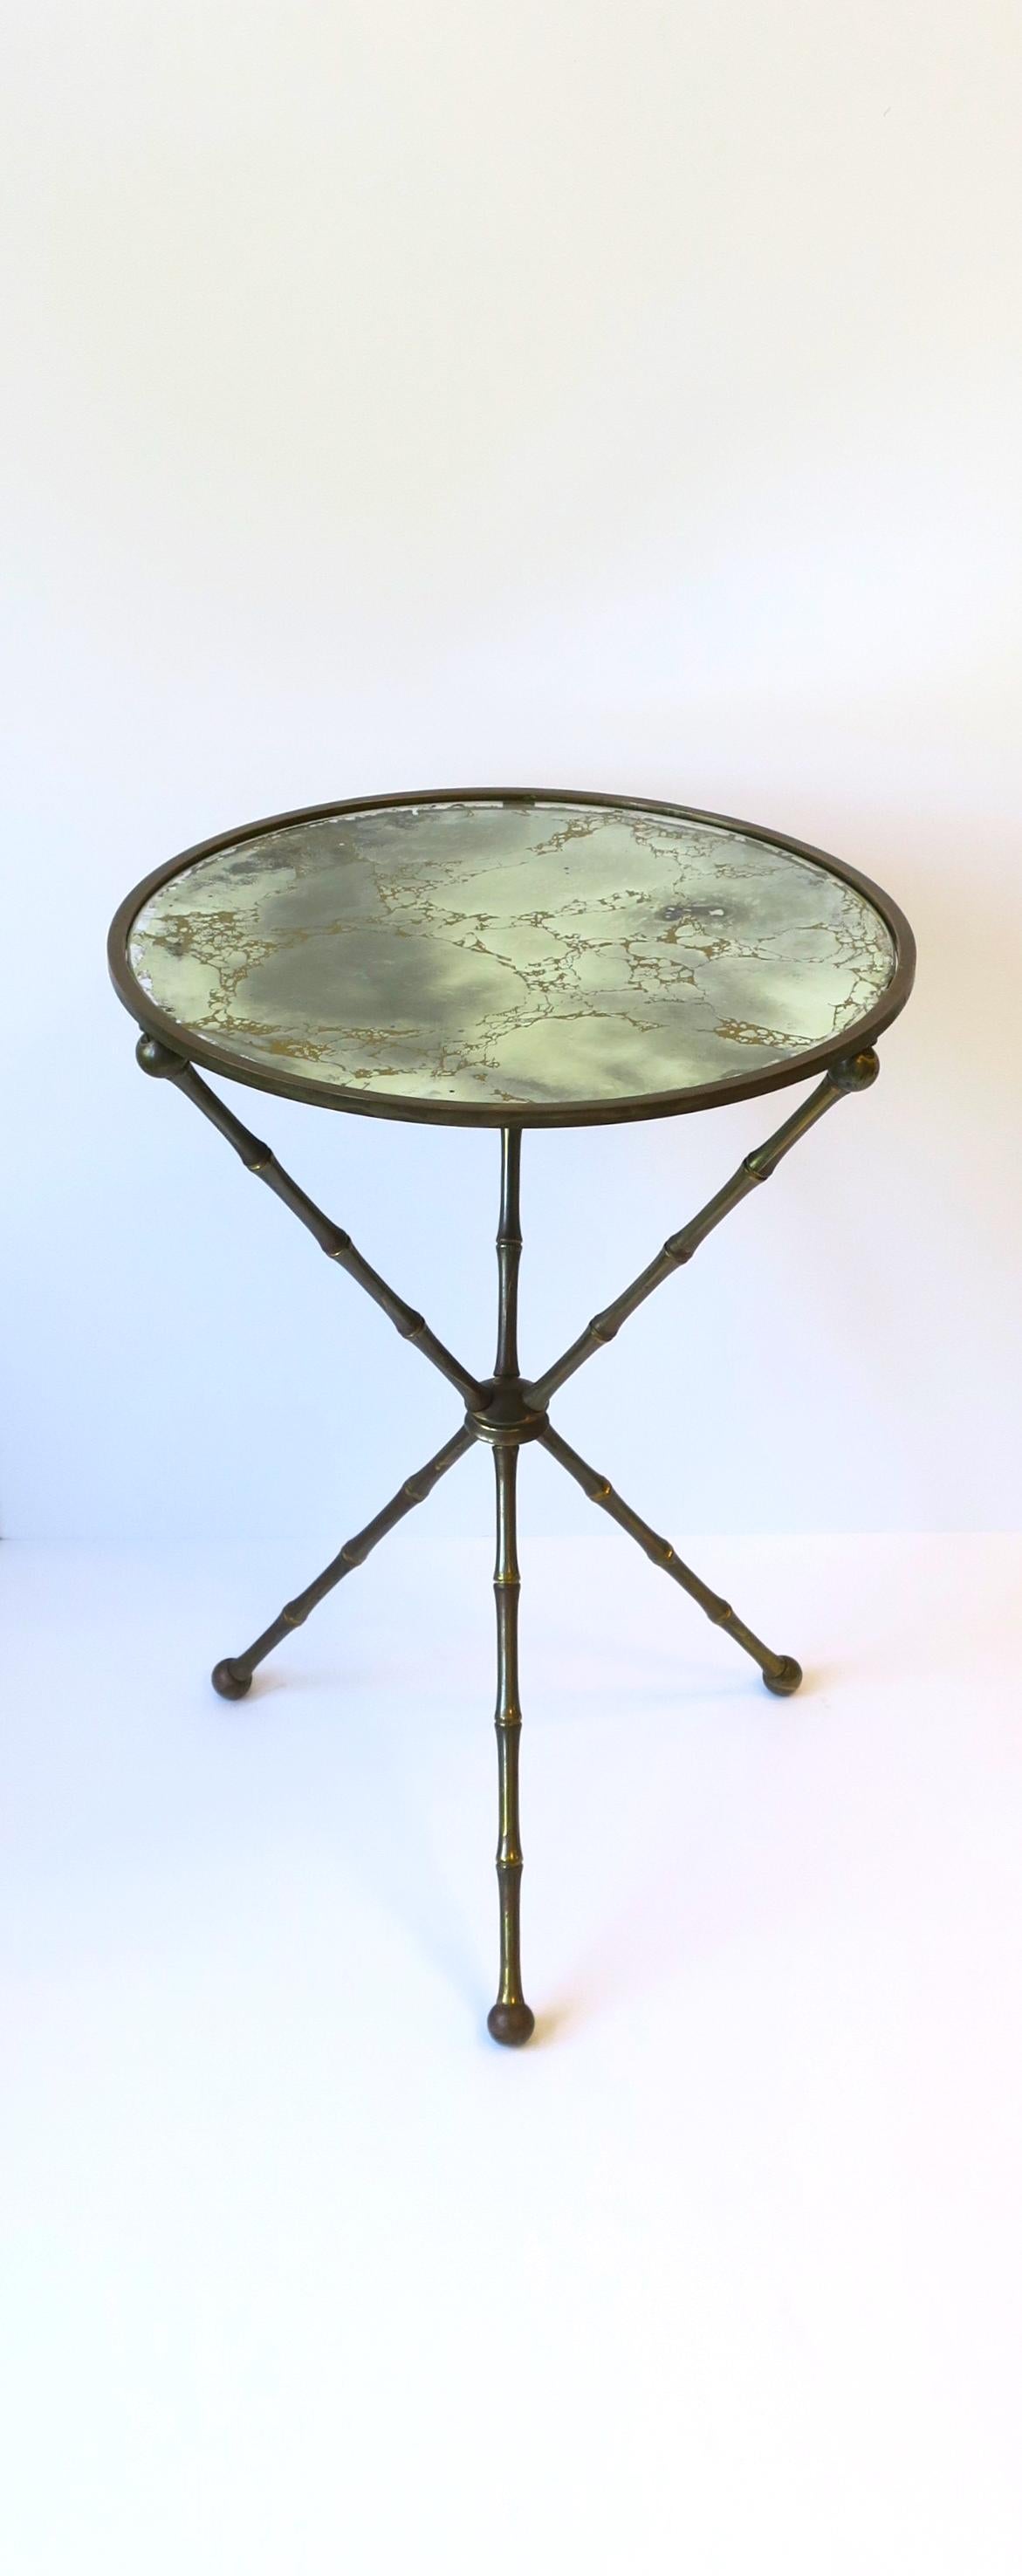 An Italian tripod gueridon round side or drinks table with brass frame in a 'bamboo' design and eglomise mirrored glass top, circa mid-20th century, 1960s, Italy. 

Dimensions: 16.75